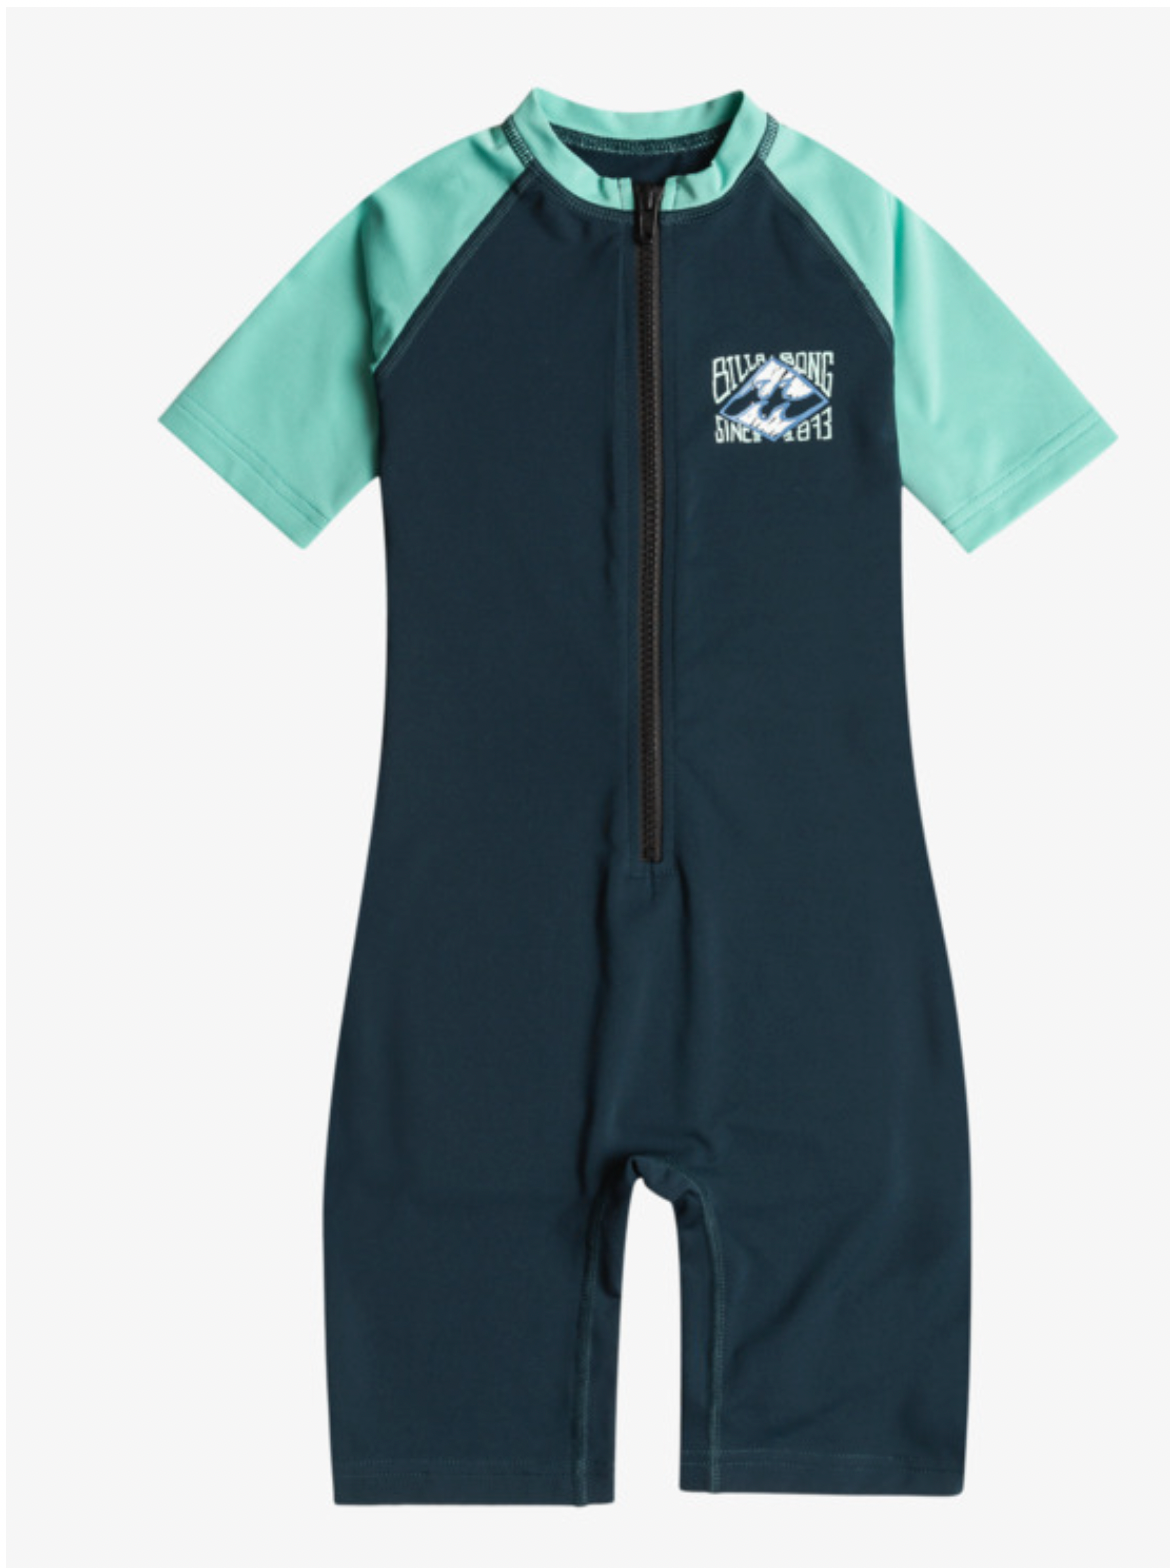 Boxed In - BILLABONG Long Sleeve One-Piece Rash Vest for Toddlers